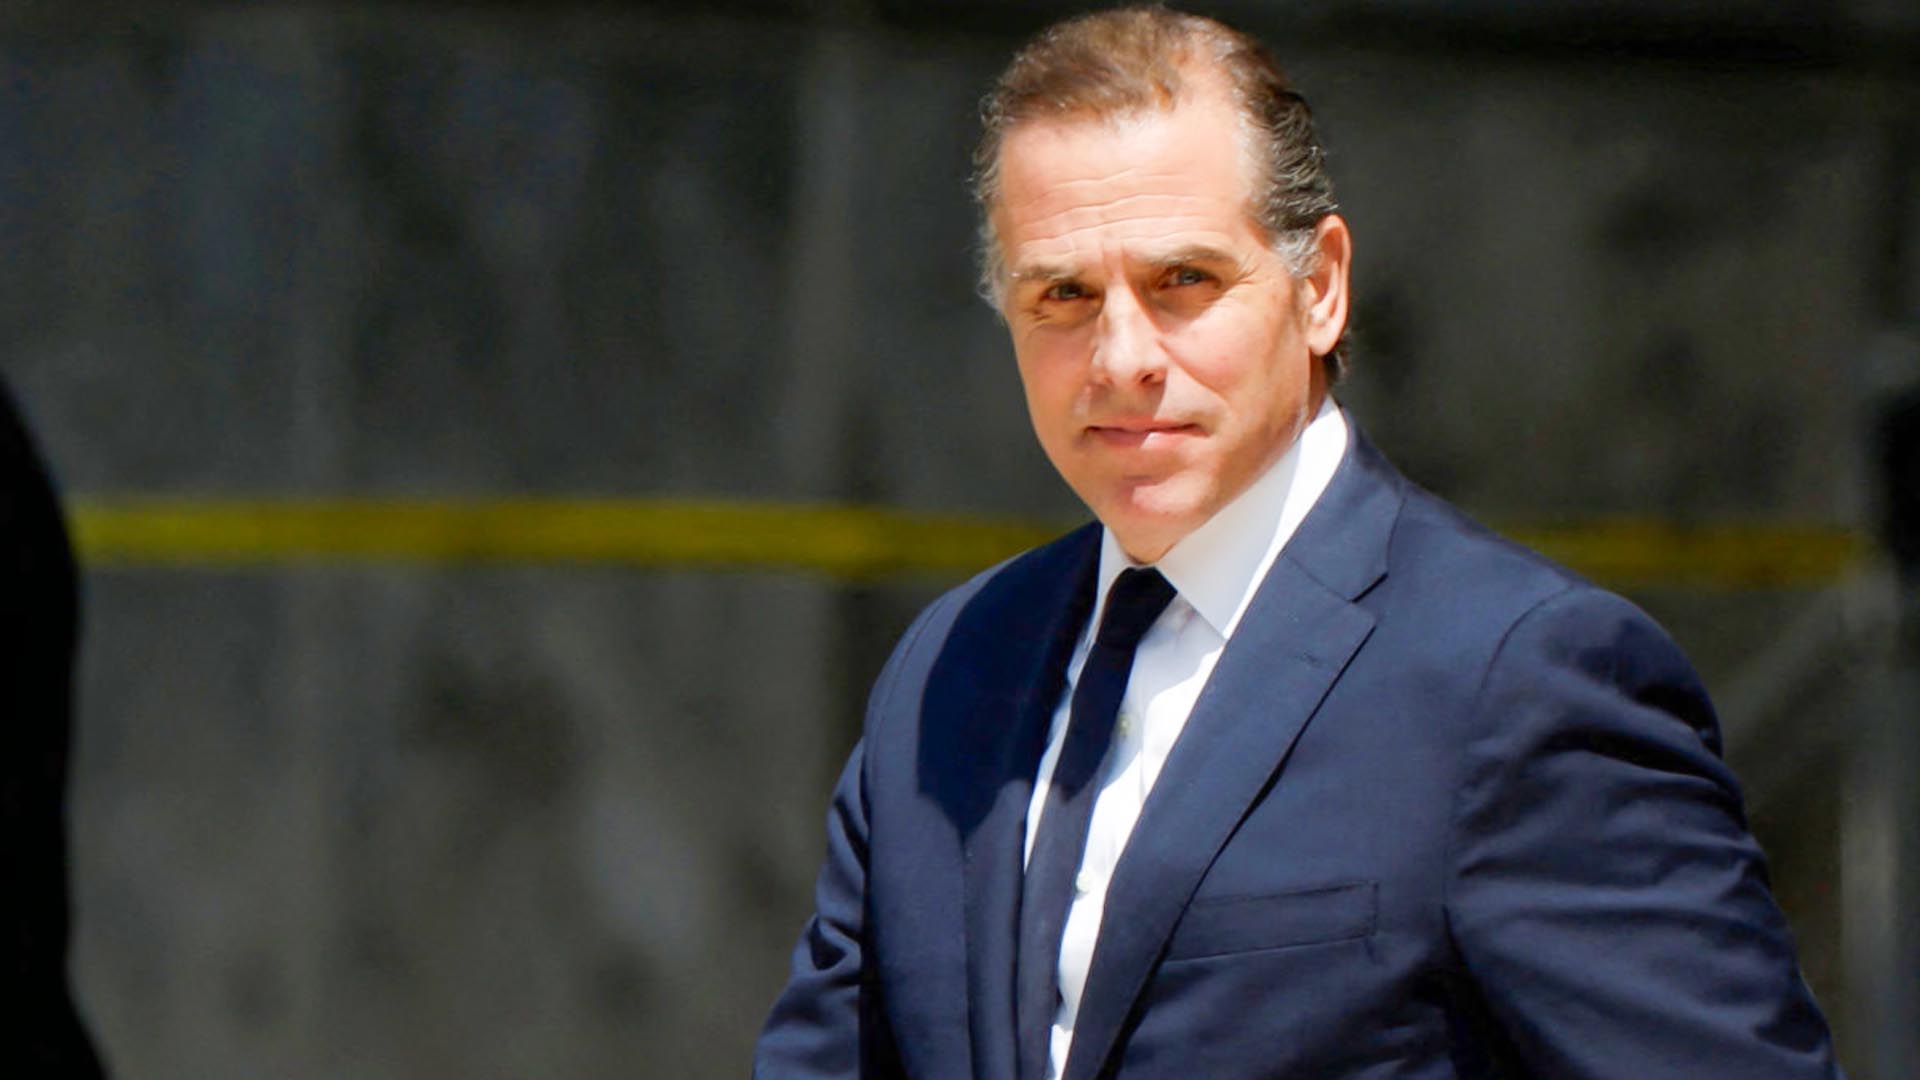 Hunter Biden faces charges over illegal firearm purchase